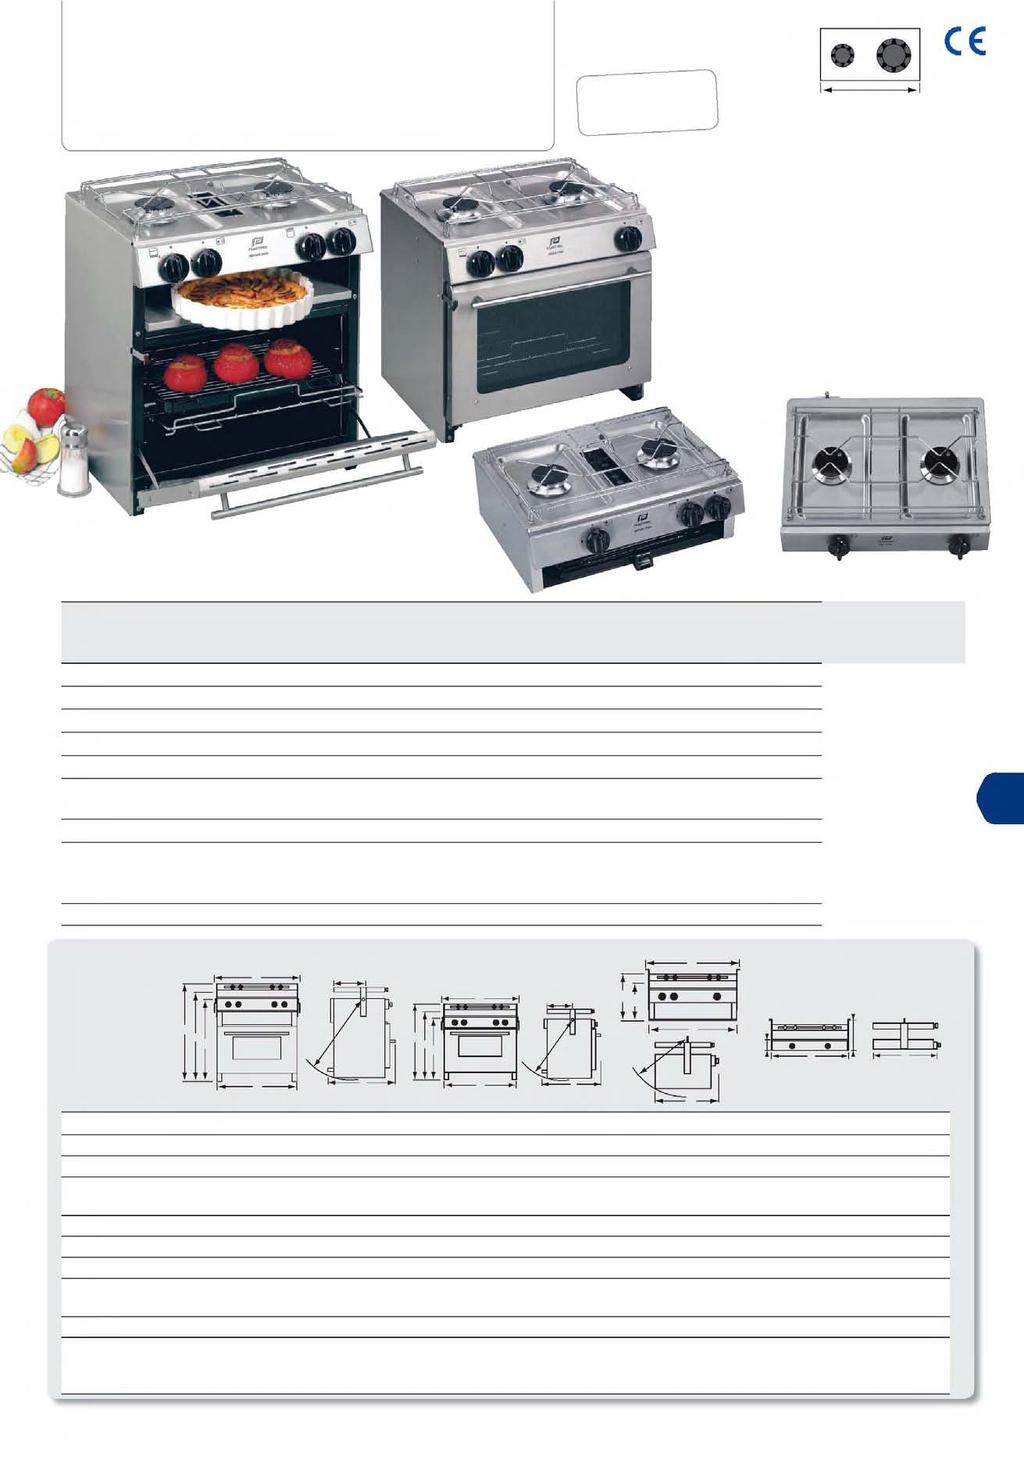 ookers & hobs : 4500 series Thermostat controlled oven.